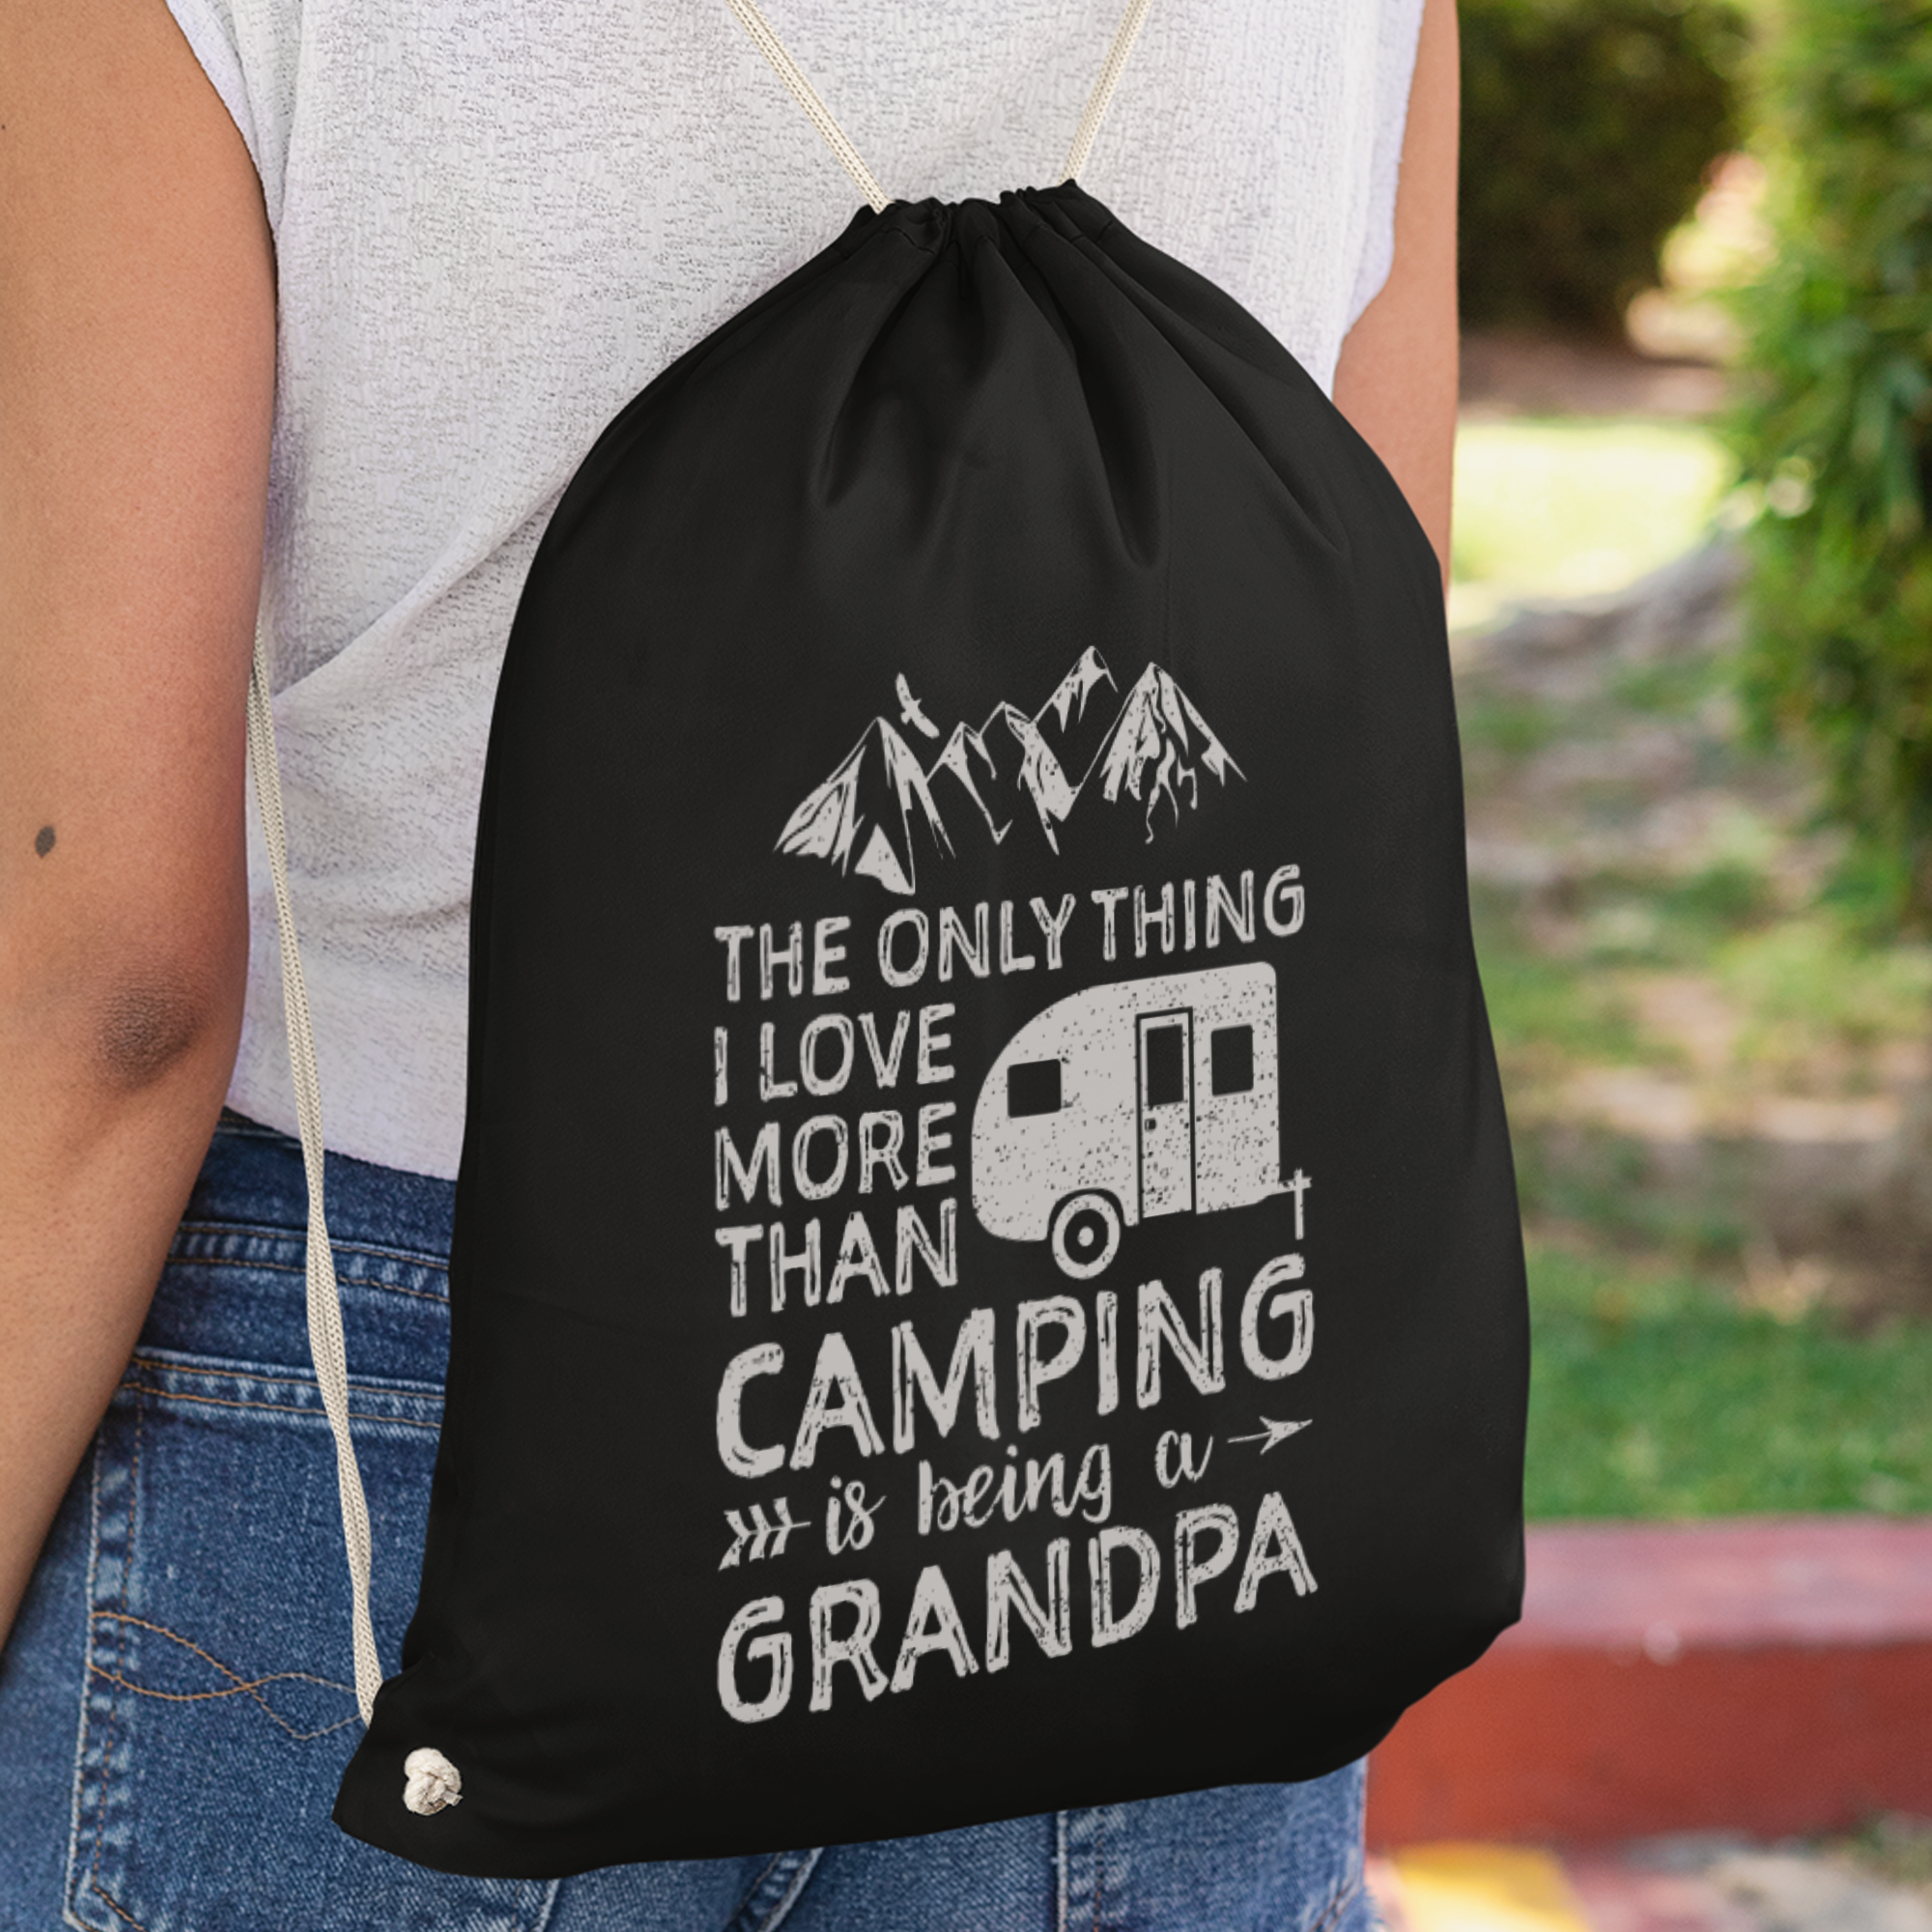 The Only Thing I Love More Than Camping Is Being A Grandpa Turnbeutel - DESIGNSBYJNK5.COM